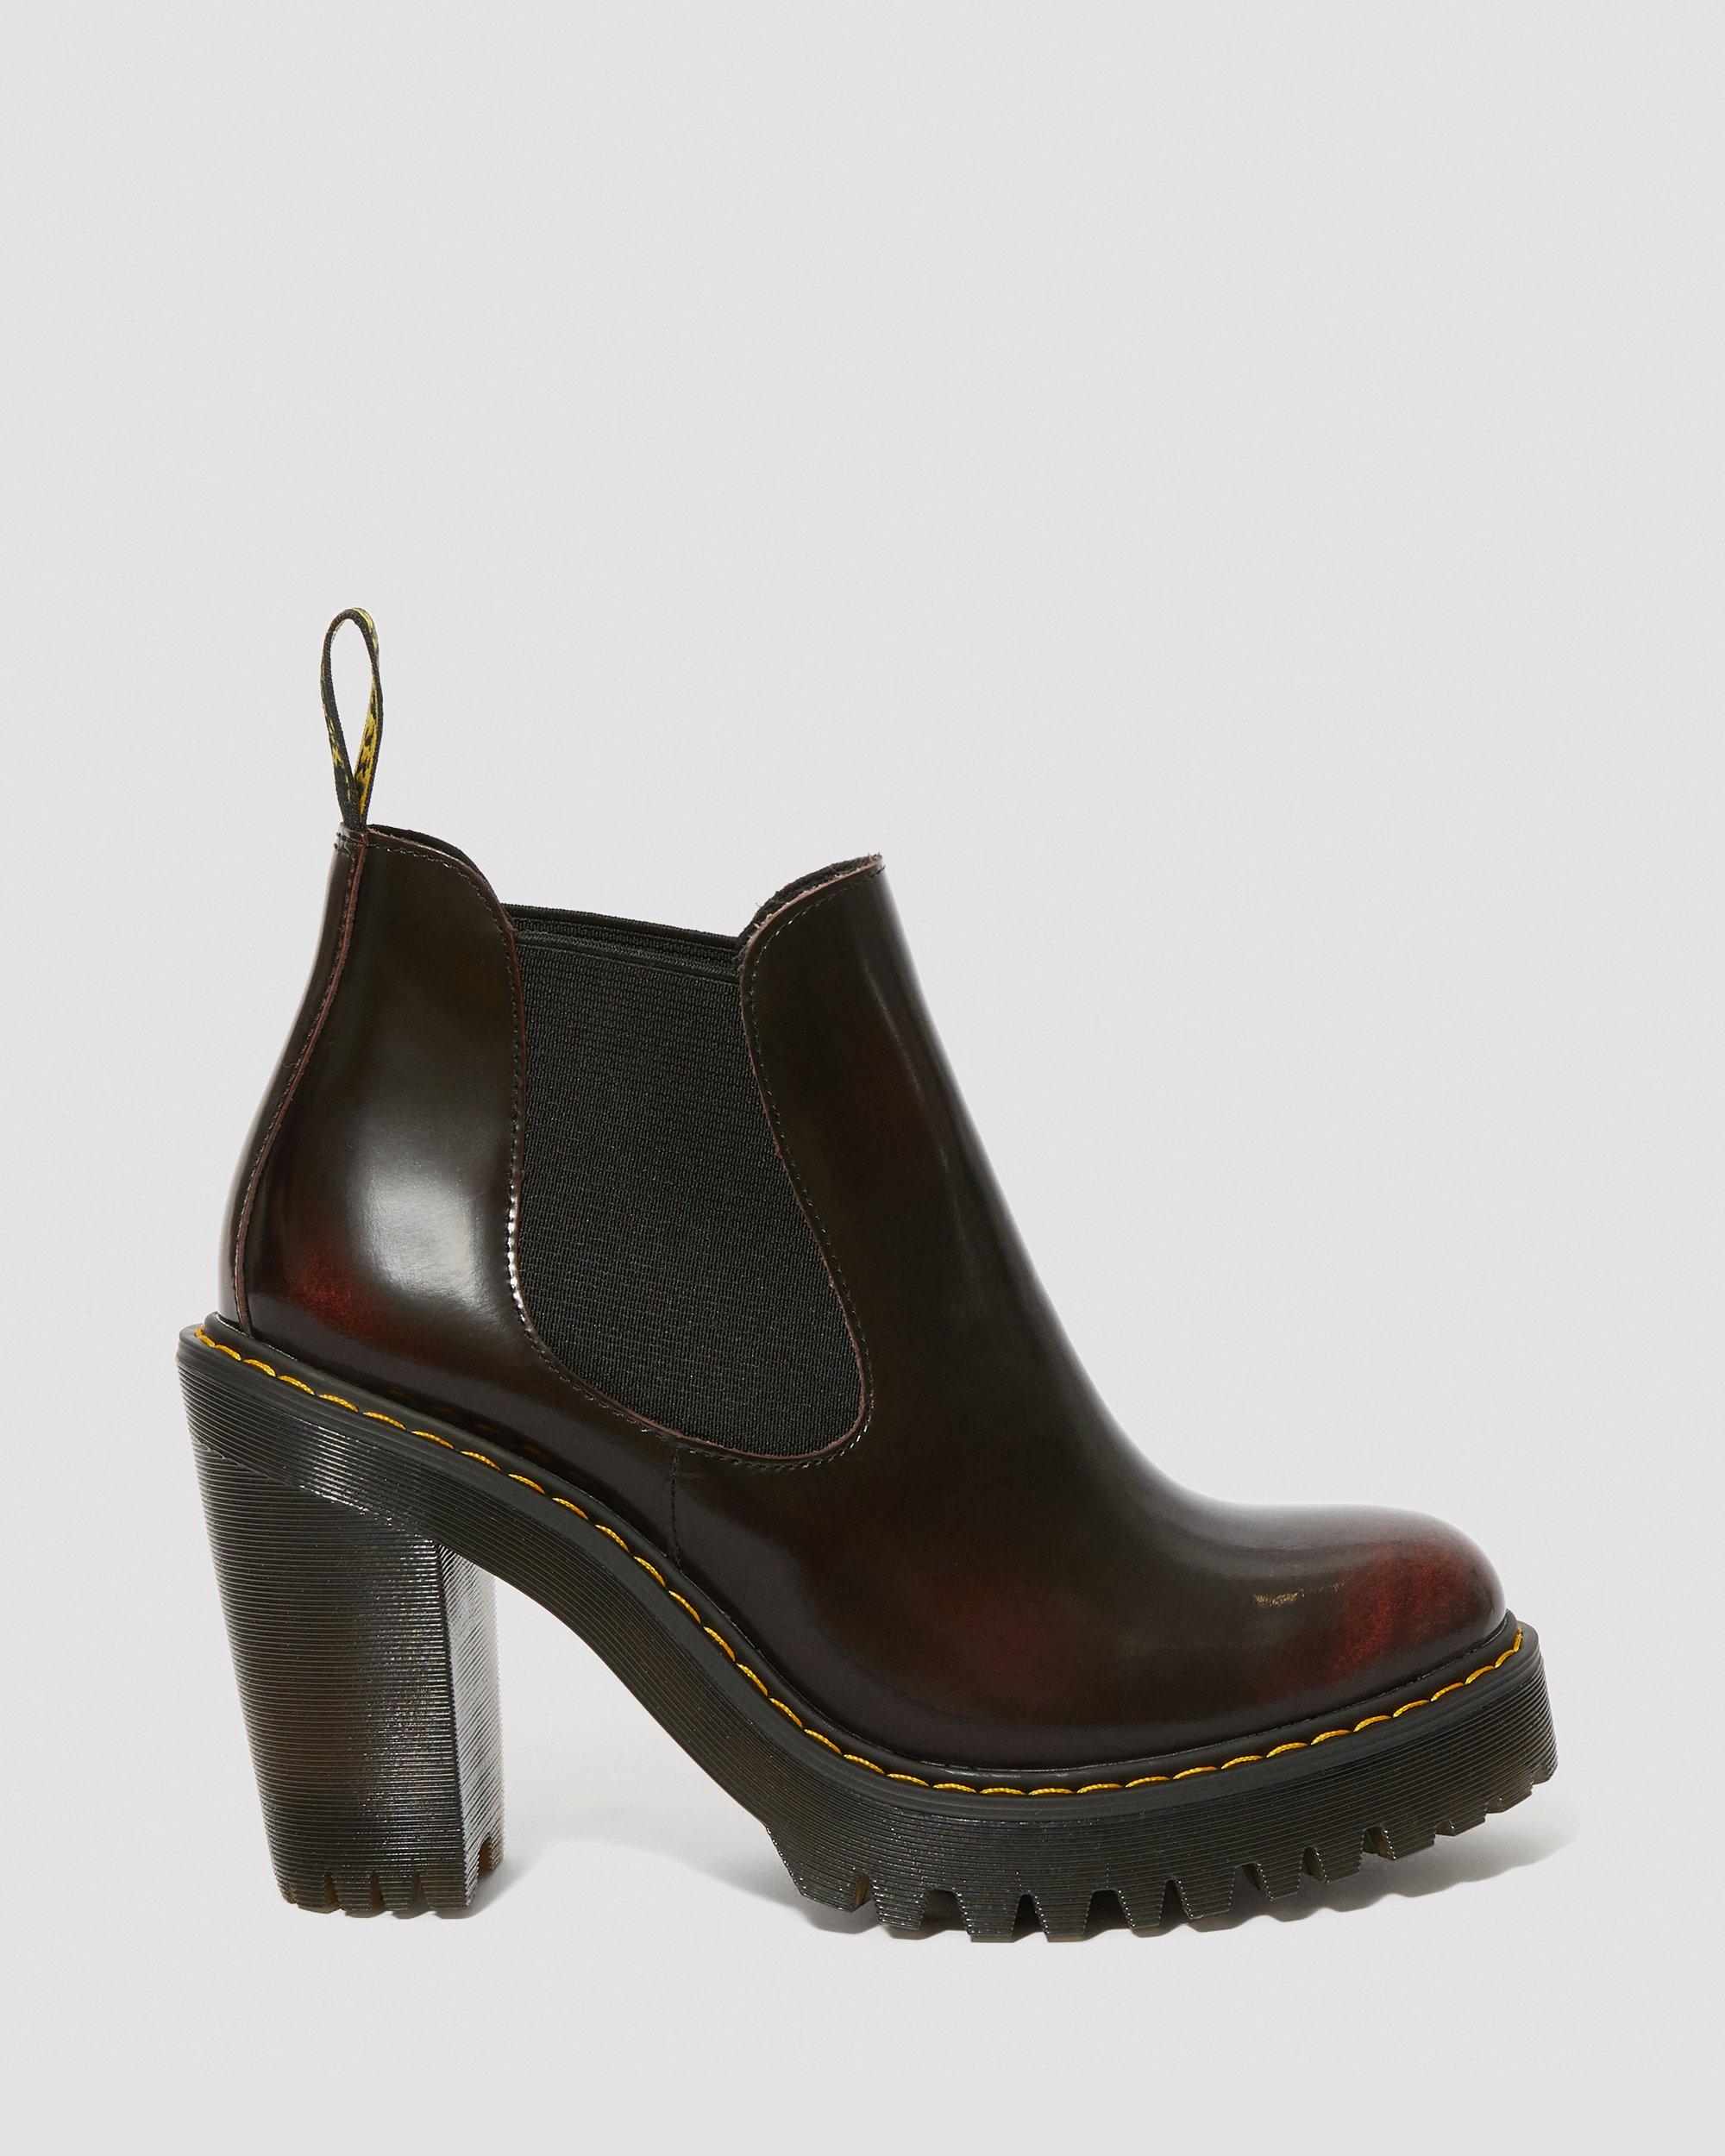 DR MARTENS Hurston Women's Arcadia Leather Heeled Chelsea Boots